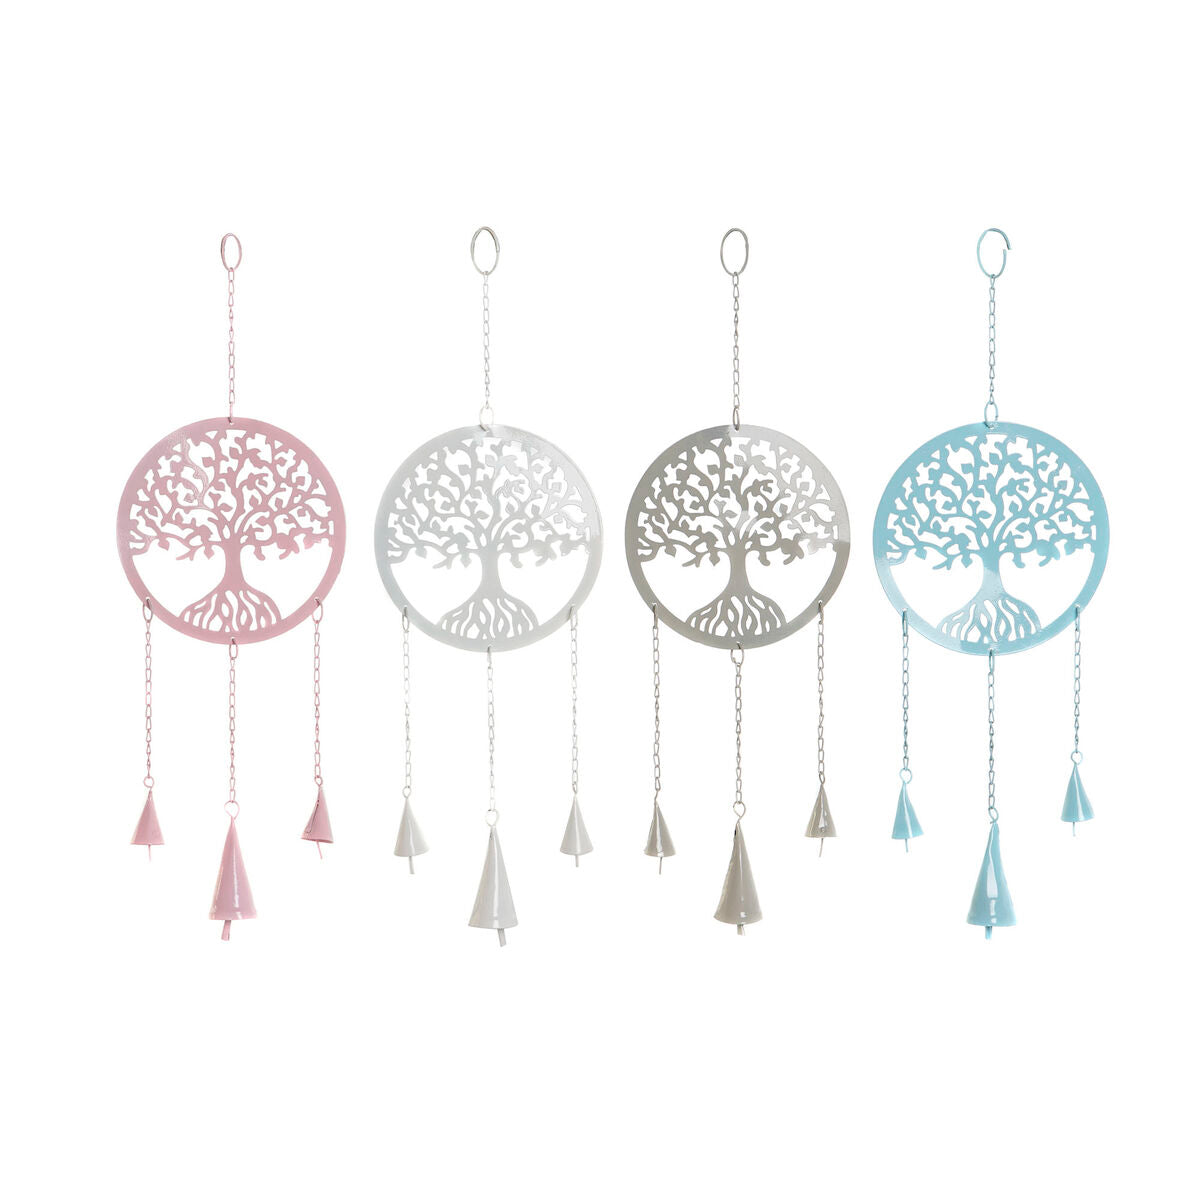 Hanging decoration DKD Home Decor Trees White Beige Gray Pink 15 x 3 x 44 cm (4 parts)